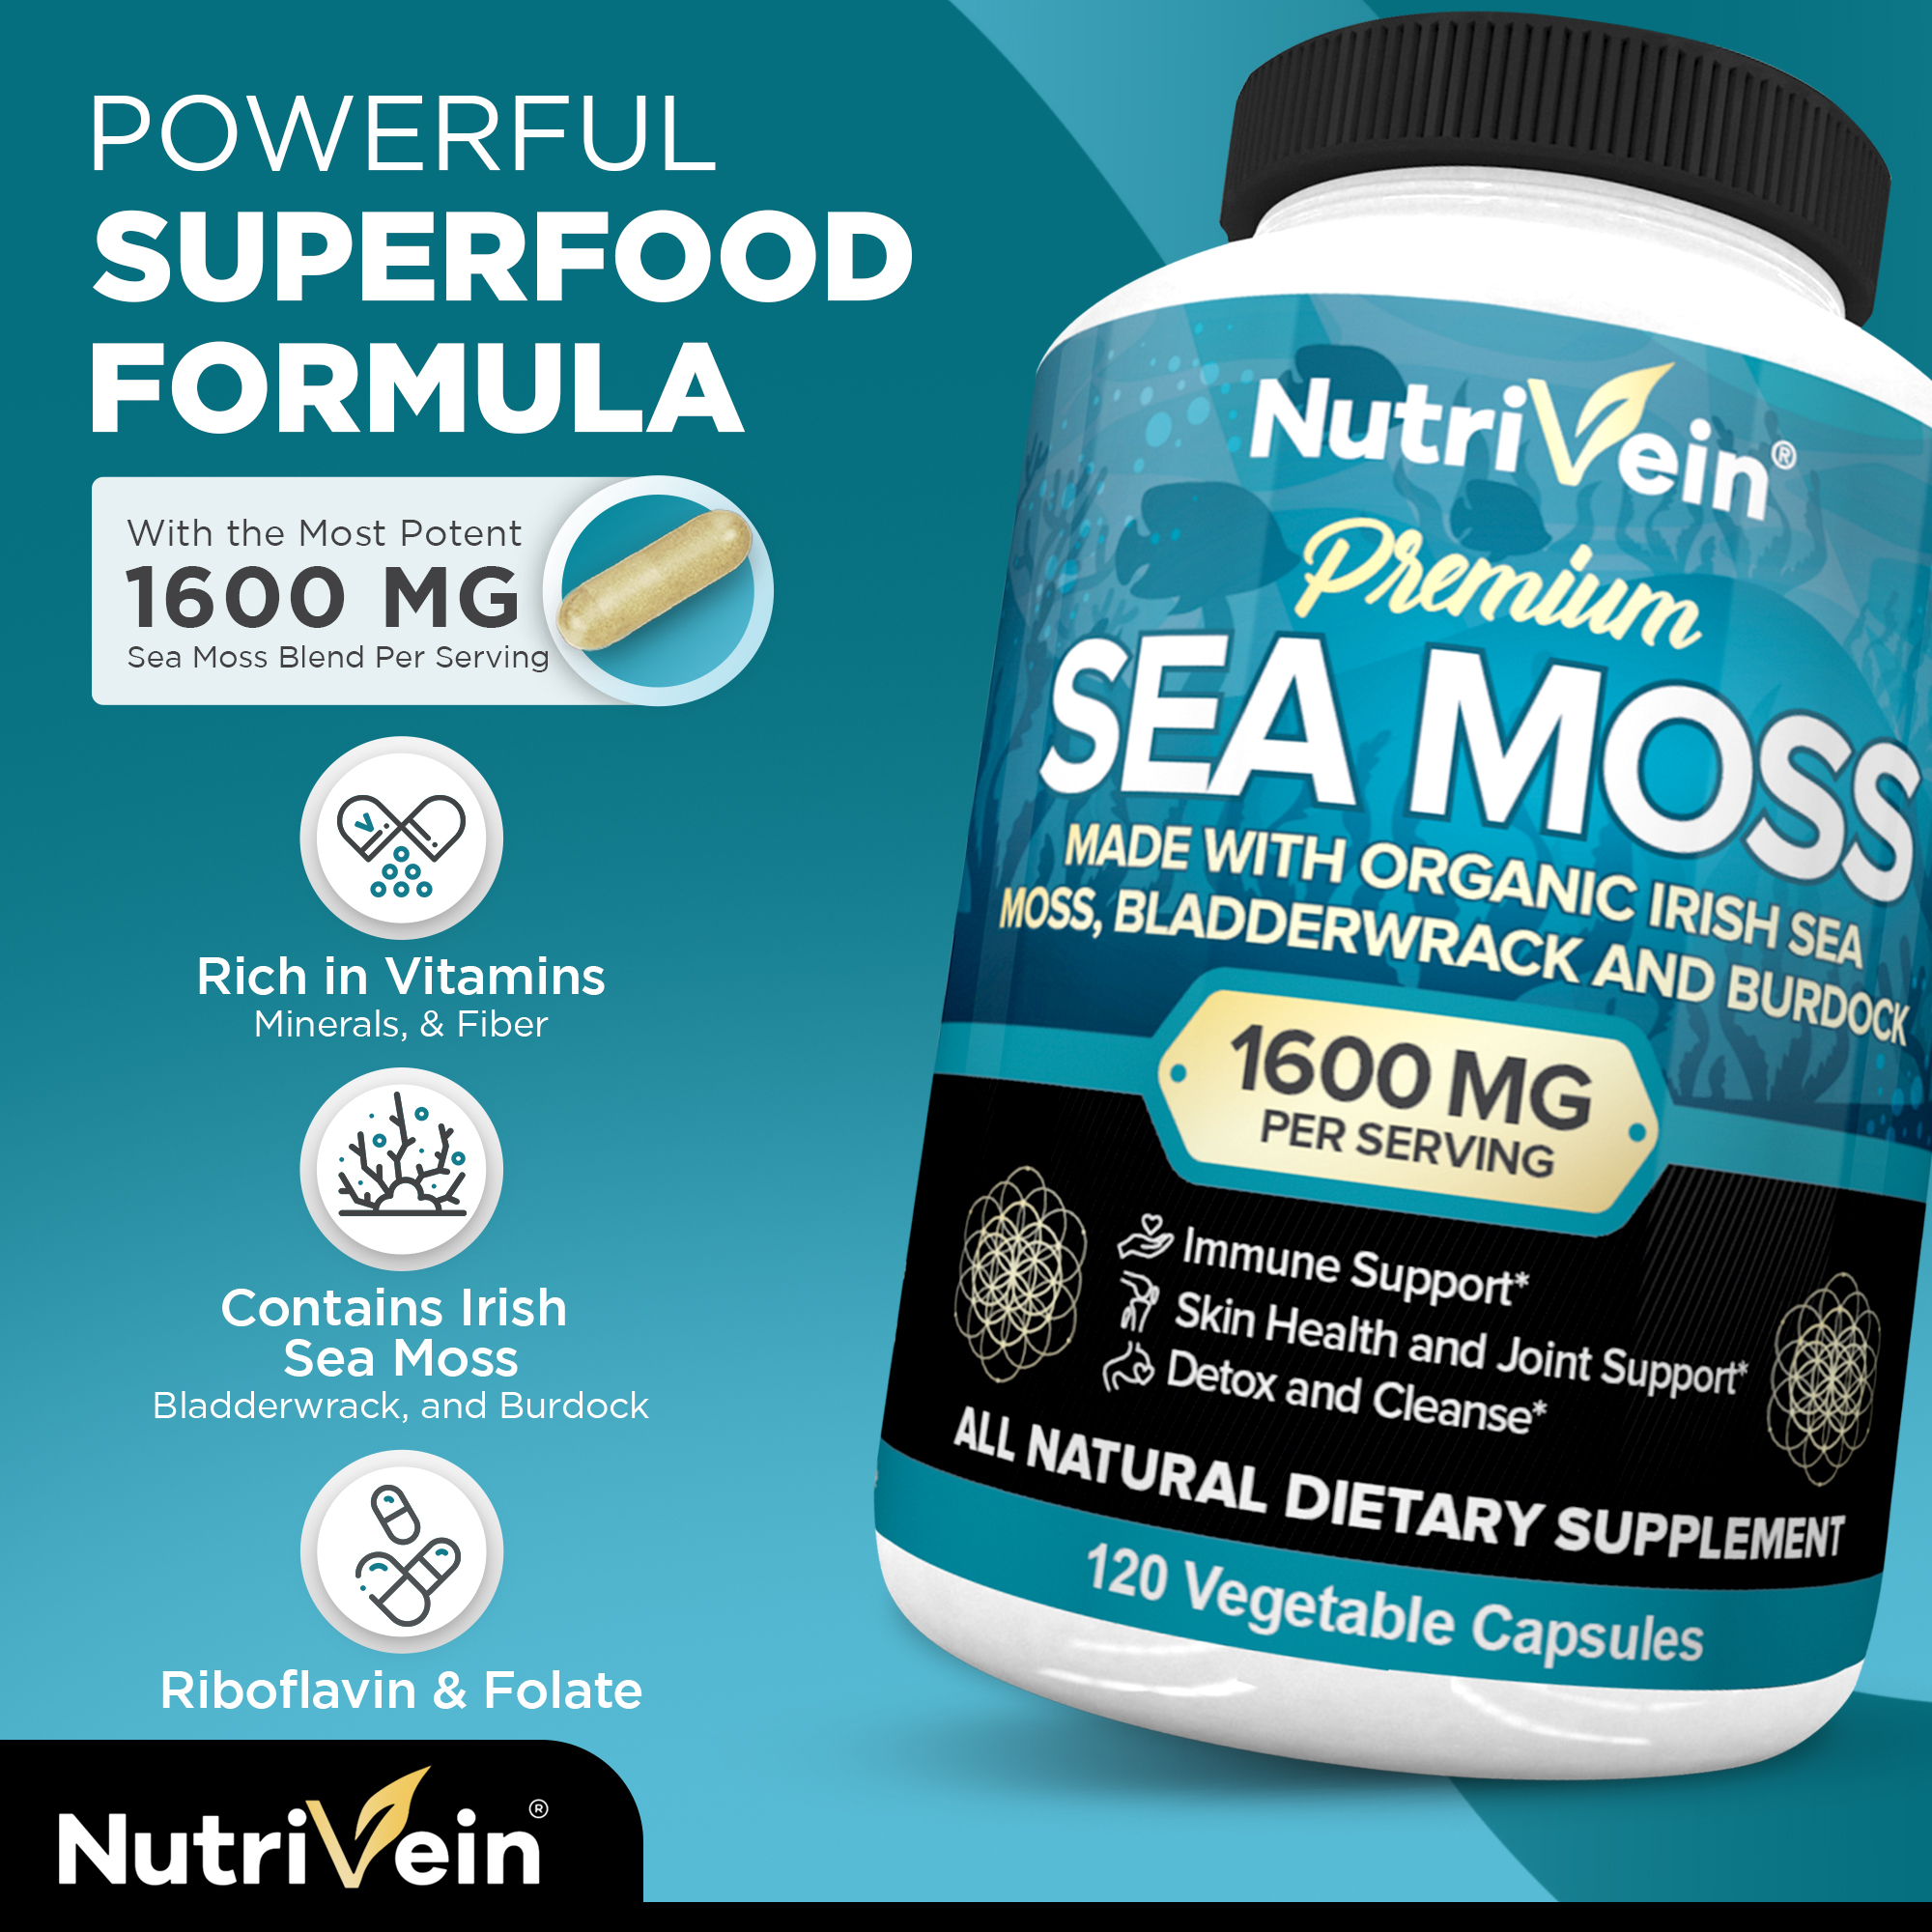 Nutrivein Organic Sea Moss 1600mg - 120 Capsules - Keto Detox, Gut, Joint Support - image 3 of 7